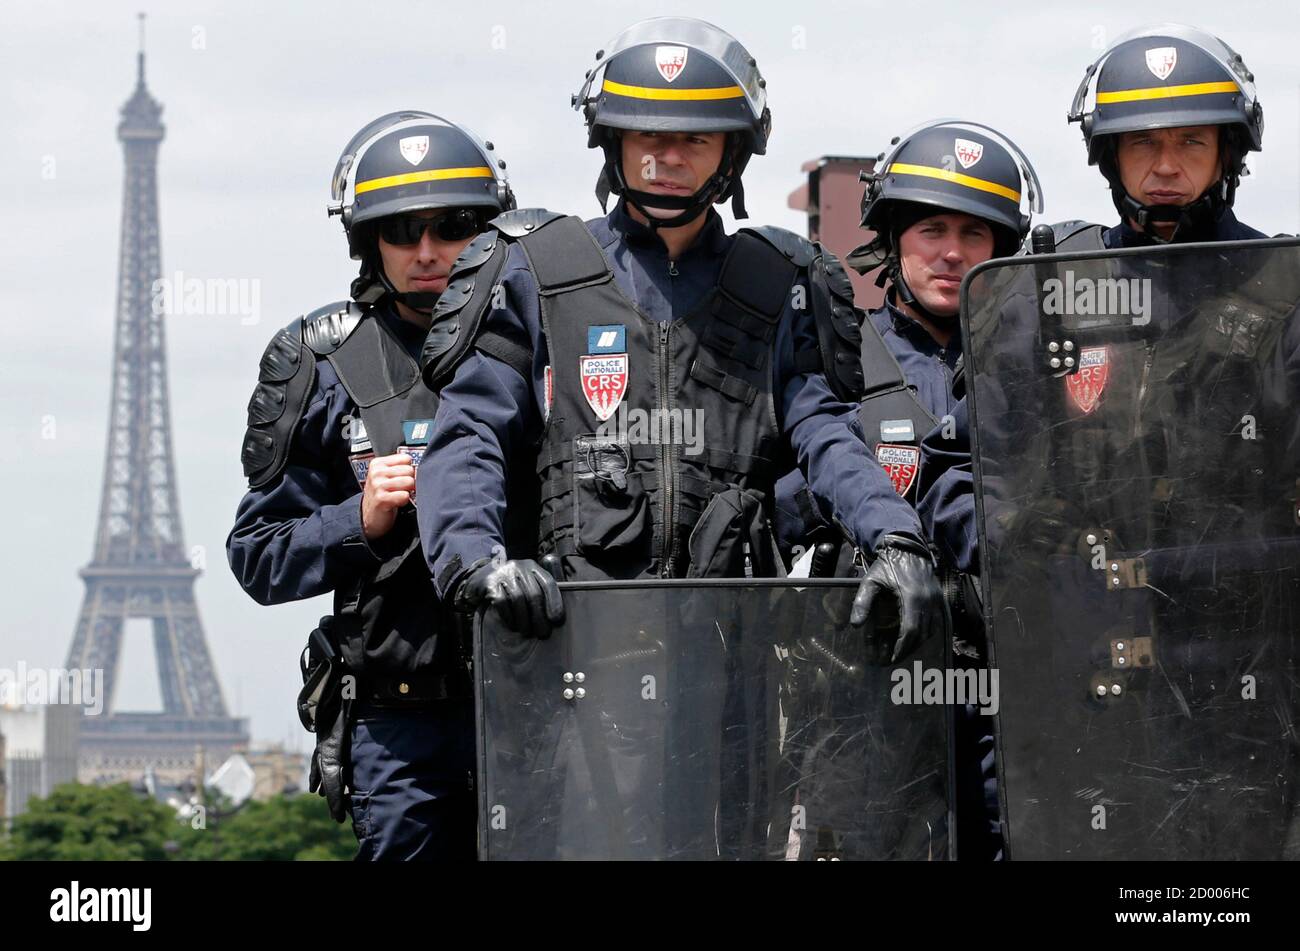 French CRS riot police officers are seen with the Eiffel Tower in the background as they secure the area next to the Gare Montparnasse station after railway workers staged a protest on the tracks against a planned reform of the sector in Paris, June 17, 2014. Workers at the SNCF train operator continue their strike which is in it's seventh day over a rail reform bill due to go to parliament today. The strike, which continues on Tuesday, is one of the longest France has seen in years and has disrupted services since it began on June 10. REUTERS/Christian Hartmann (FRANCE - Tags: BUSINESS CIVIL  Stock Photo